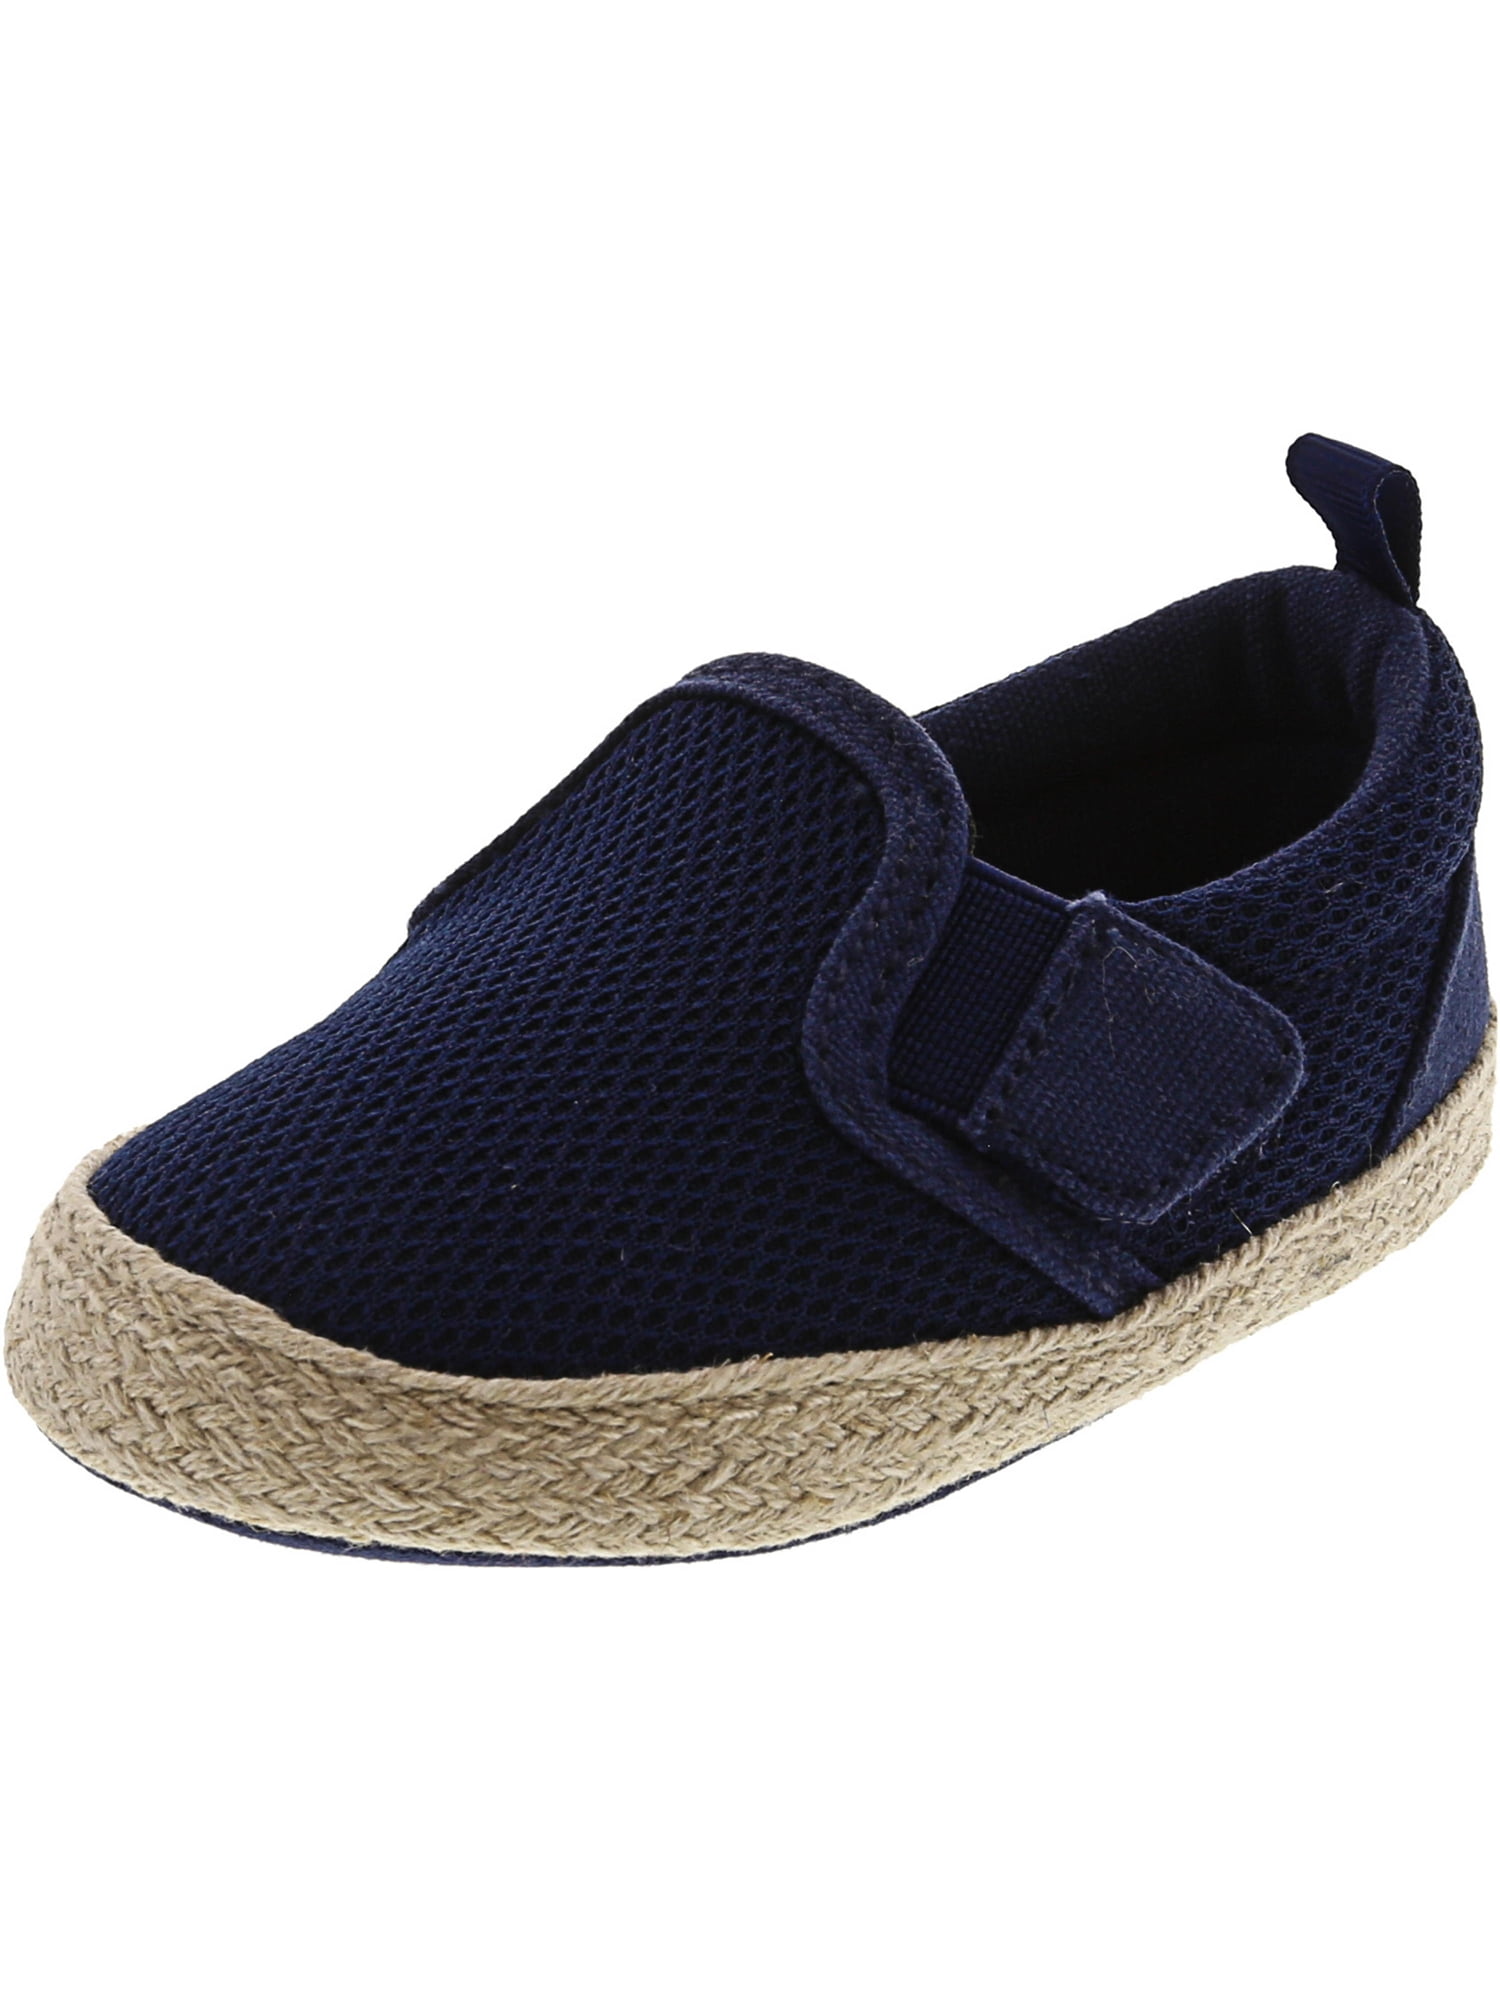 children's place slip on shoes